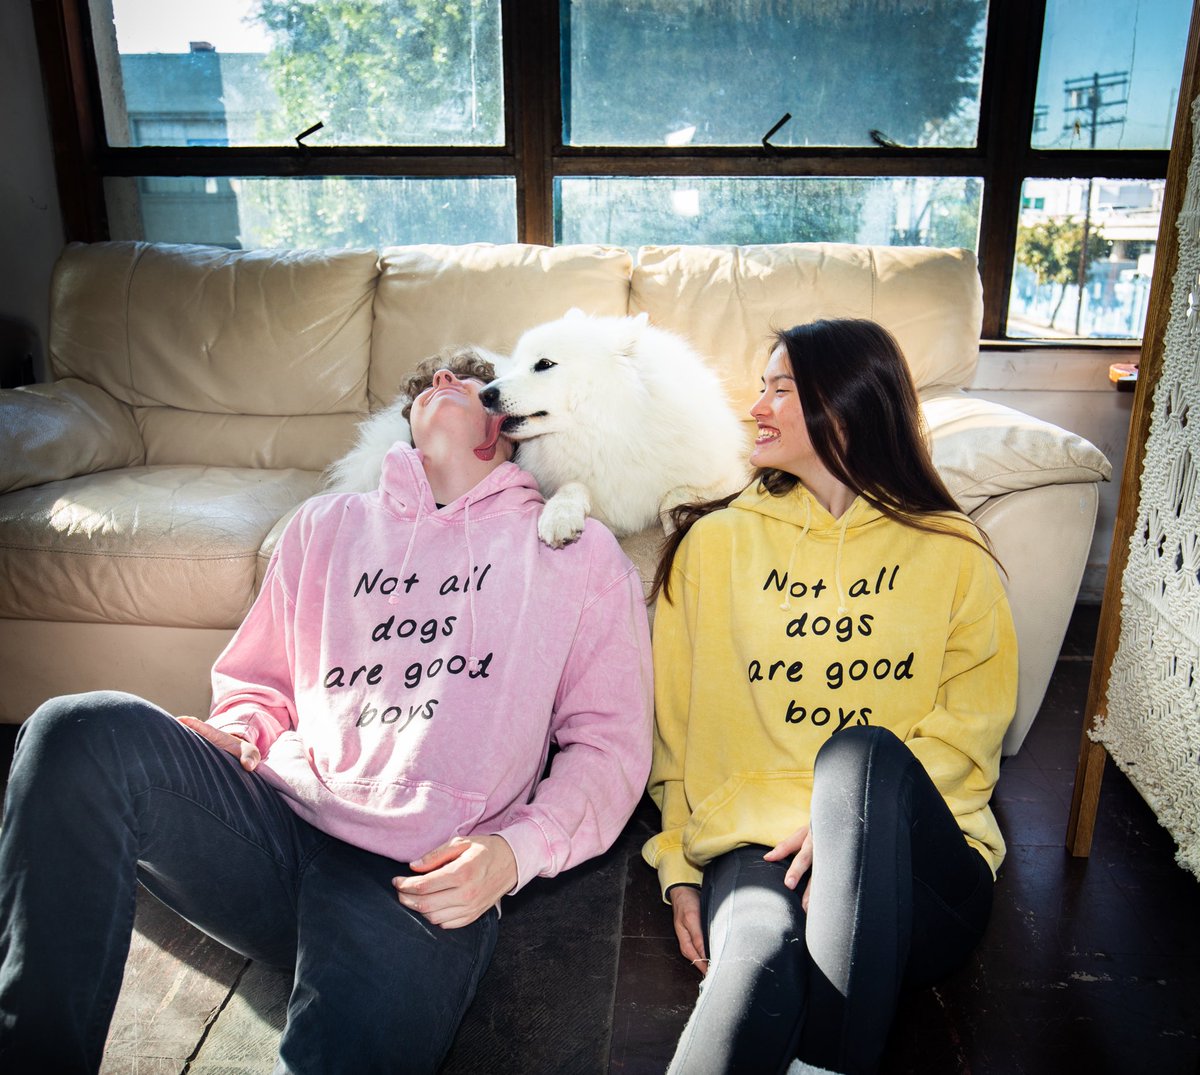 ...some are good girlsAvailable Now:  https://weratedogs.com/products/not-all-dogs-are-good-boys-hoodie